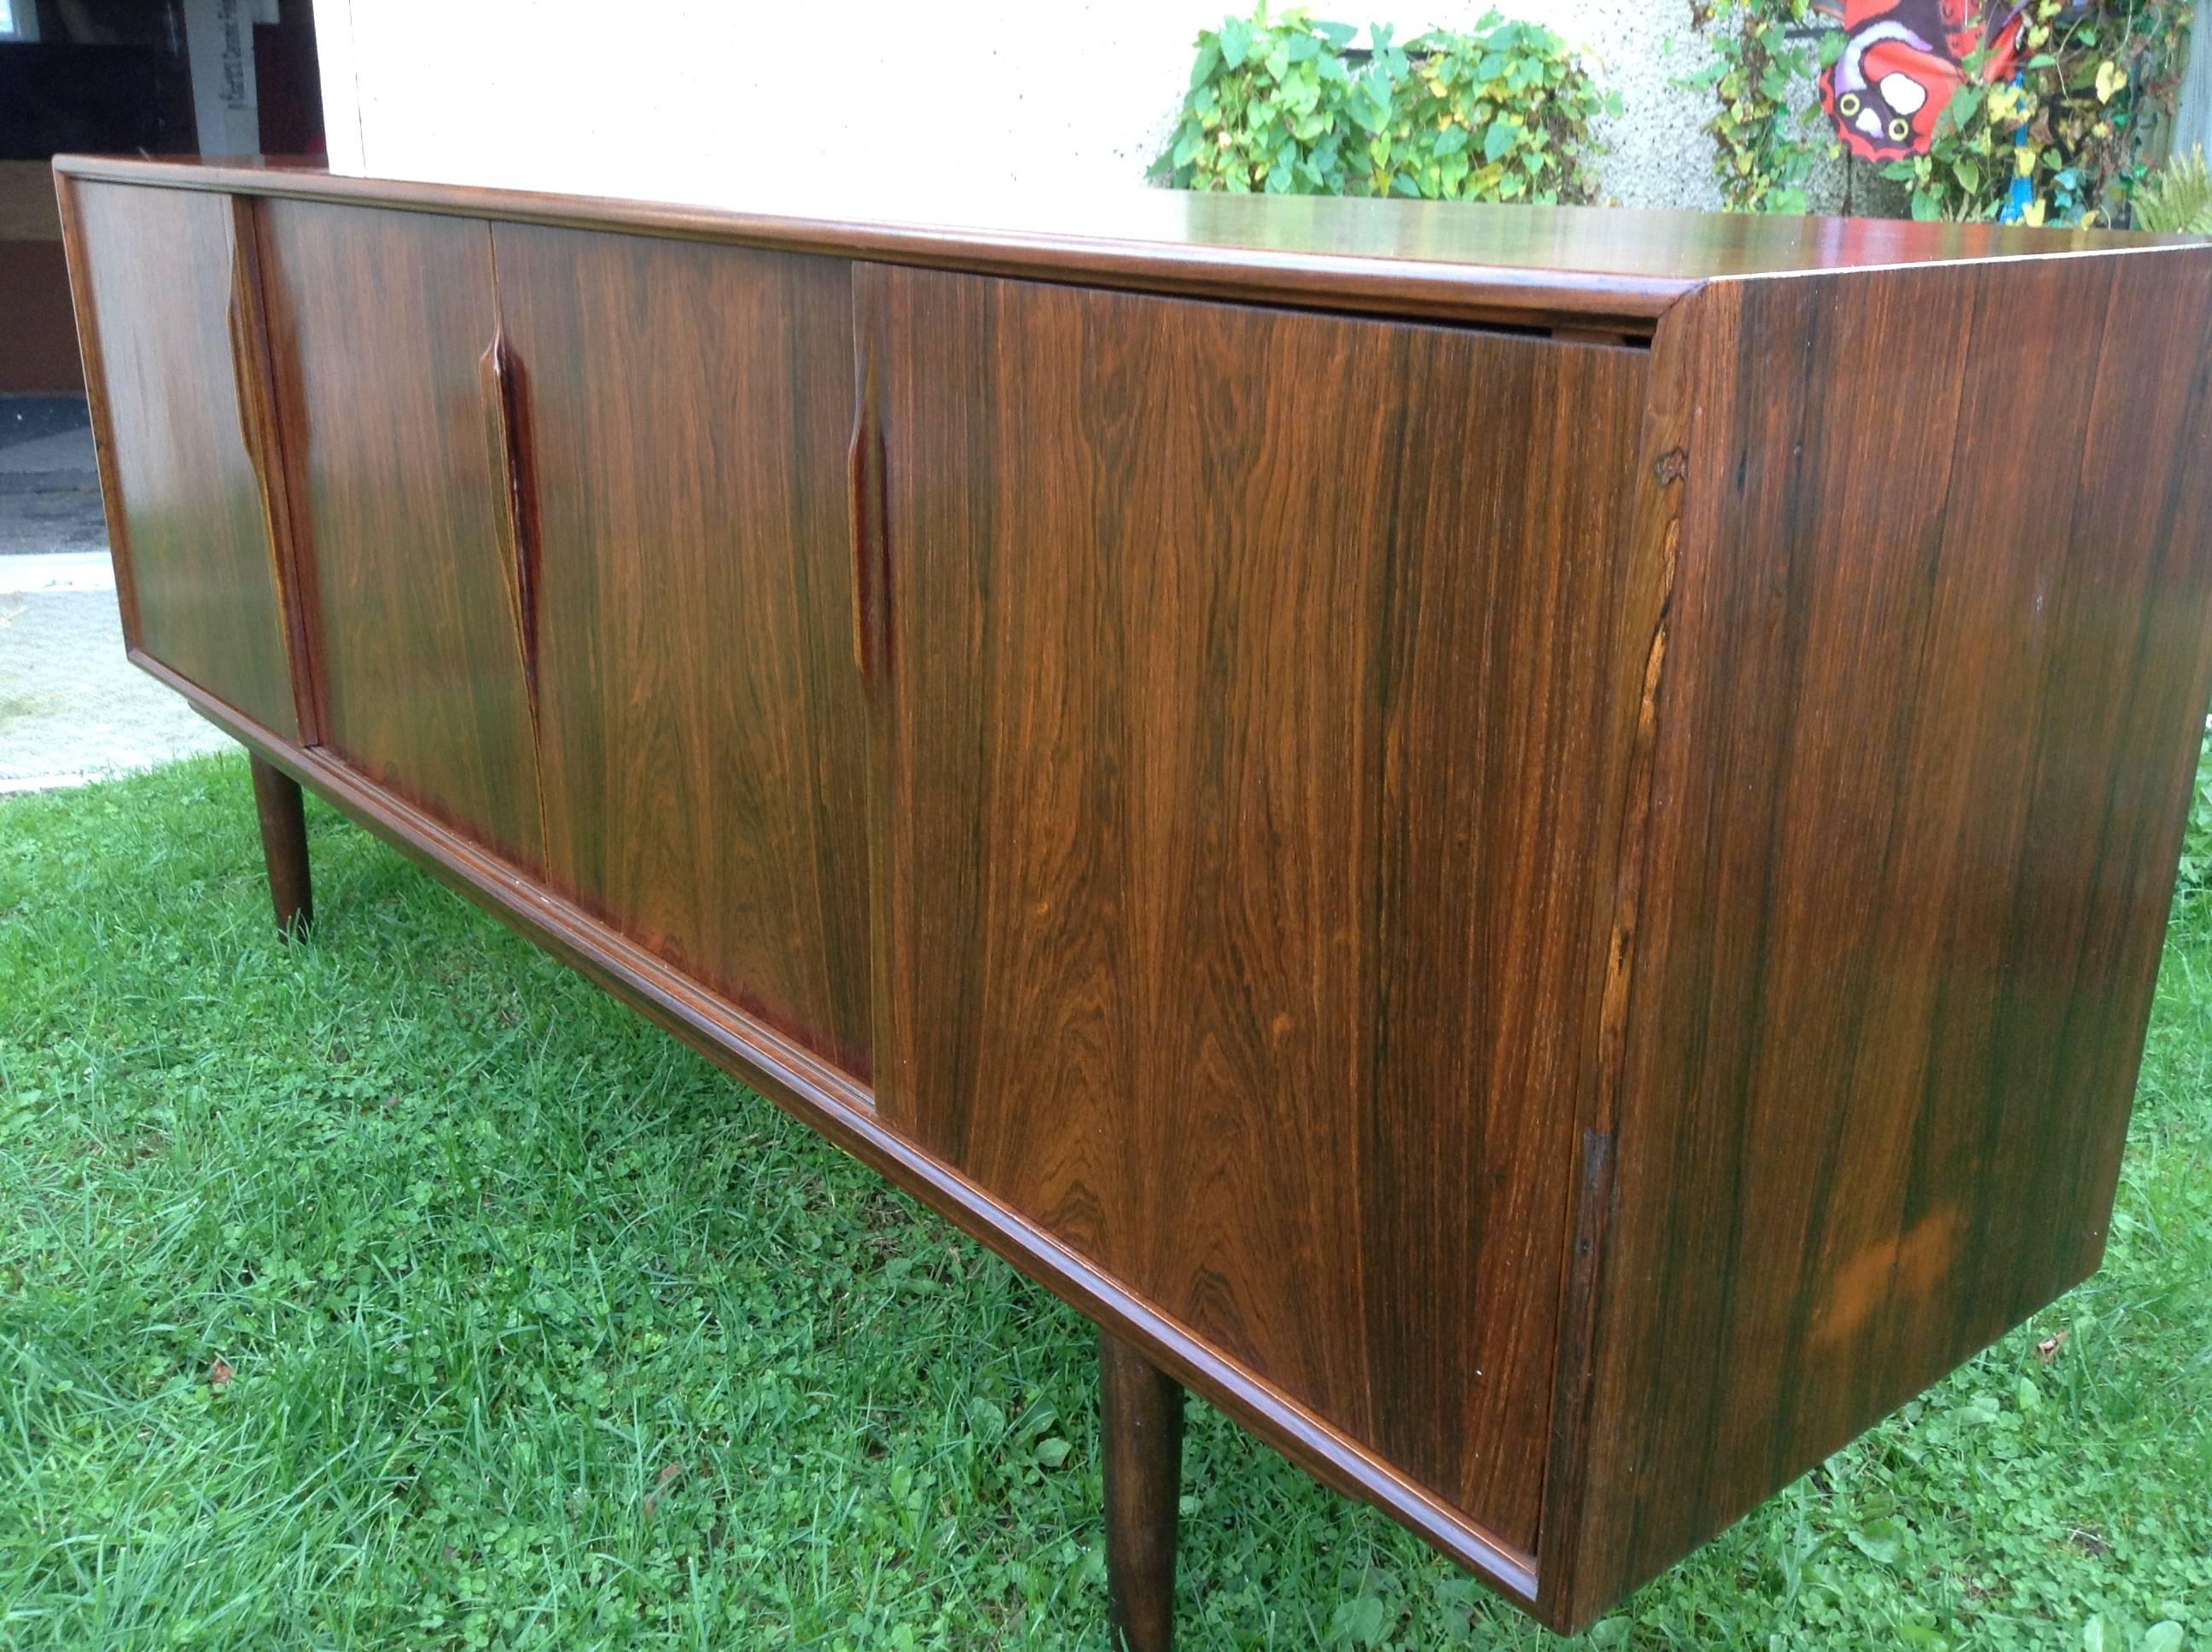 Credenza or Sideboard designed by Gunni Omann and produced by Axel Christensen, Denmark,,beautiful book matched figured rosewood . Four sliding doors ( left) adjustable shelf.,3 drawers.(right) adjustable shelves,